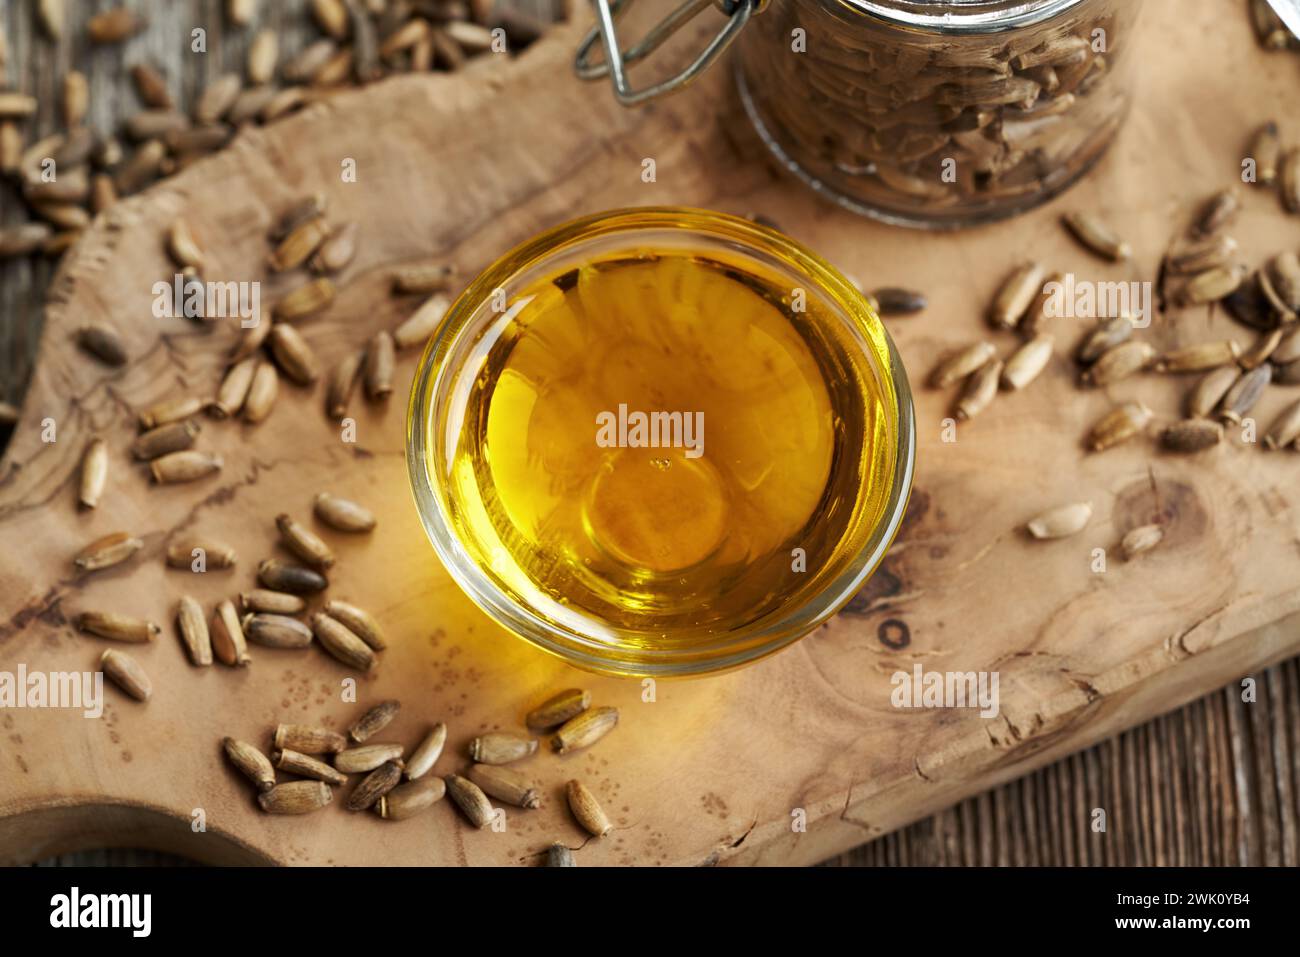 Milk thistle oil in a bowl with Carduus marianus seeds on a table Stock Photo